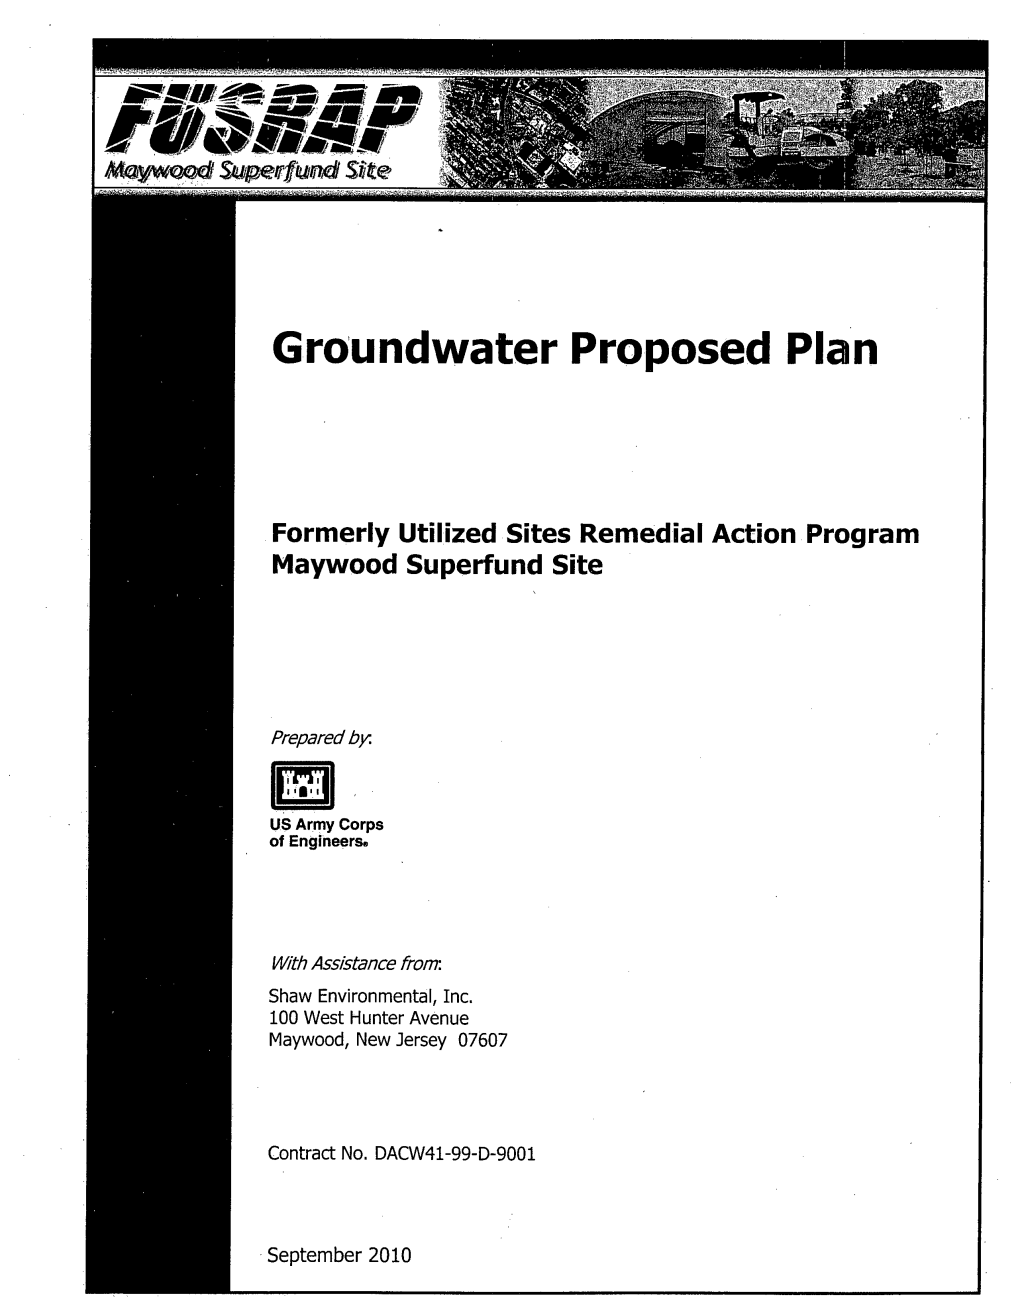 Groundwater Proposed Plan, Formerly Utilized Sites Remedial Action